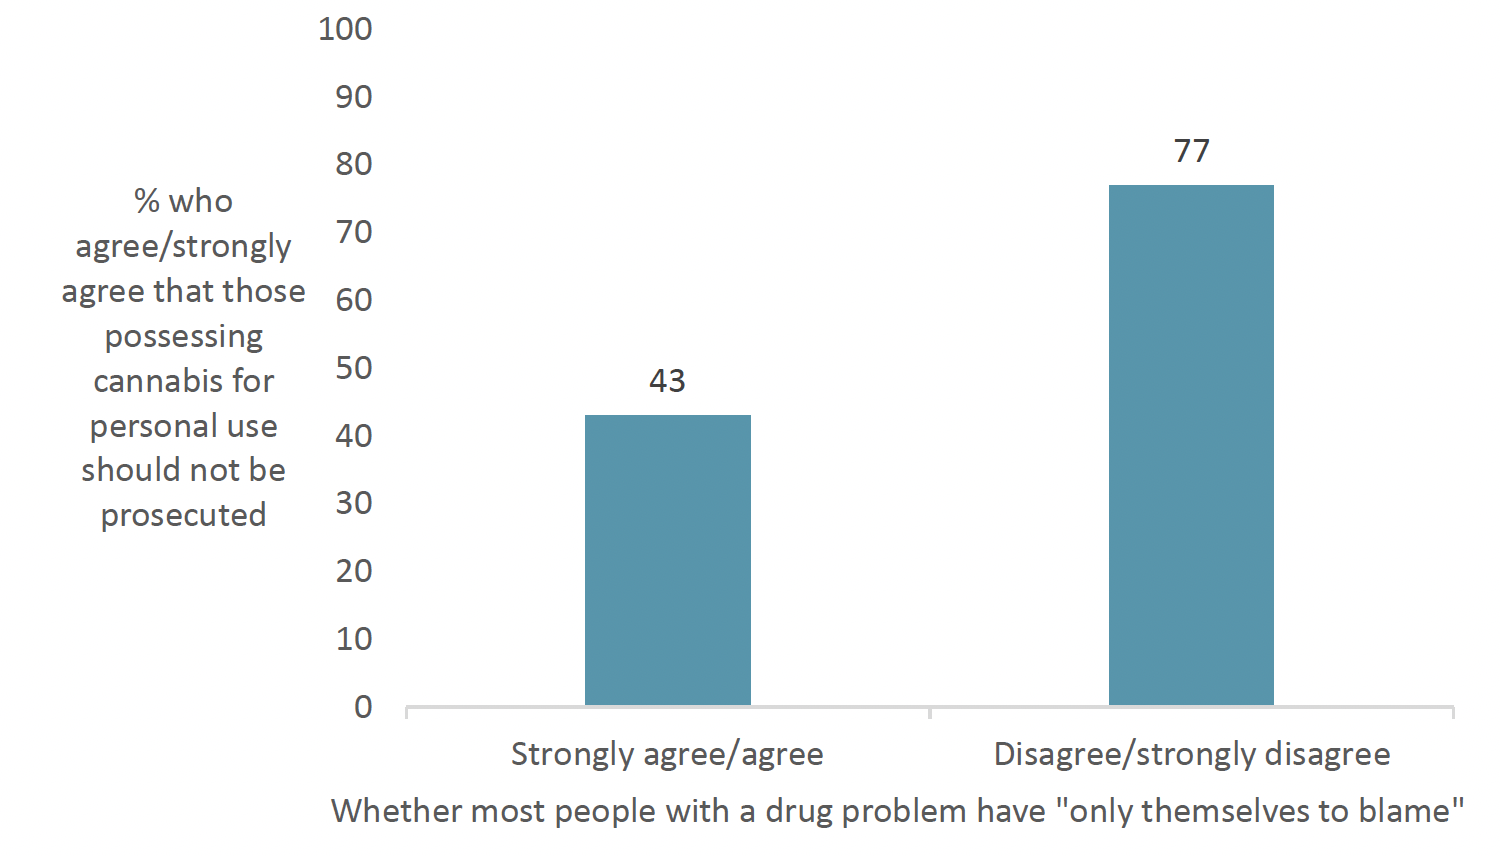 Bar graph showing the attitudes towards prosecution of small amounts of cannabis for personal use, based on views towards whether person with problem drug use only have themselves to blame. Responses indicate that respondents were less likely to feel someone should not be prosecuted if they felt that people with problem drug use only had themselves to blame. 